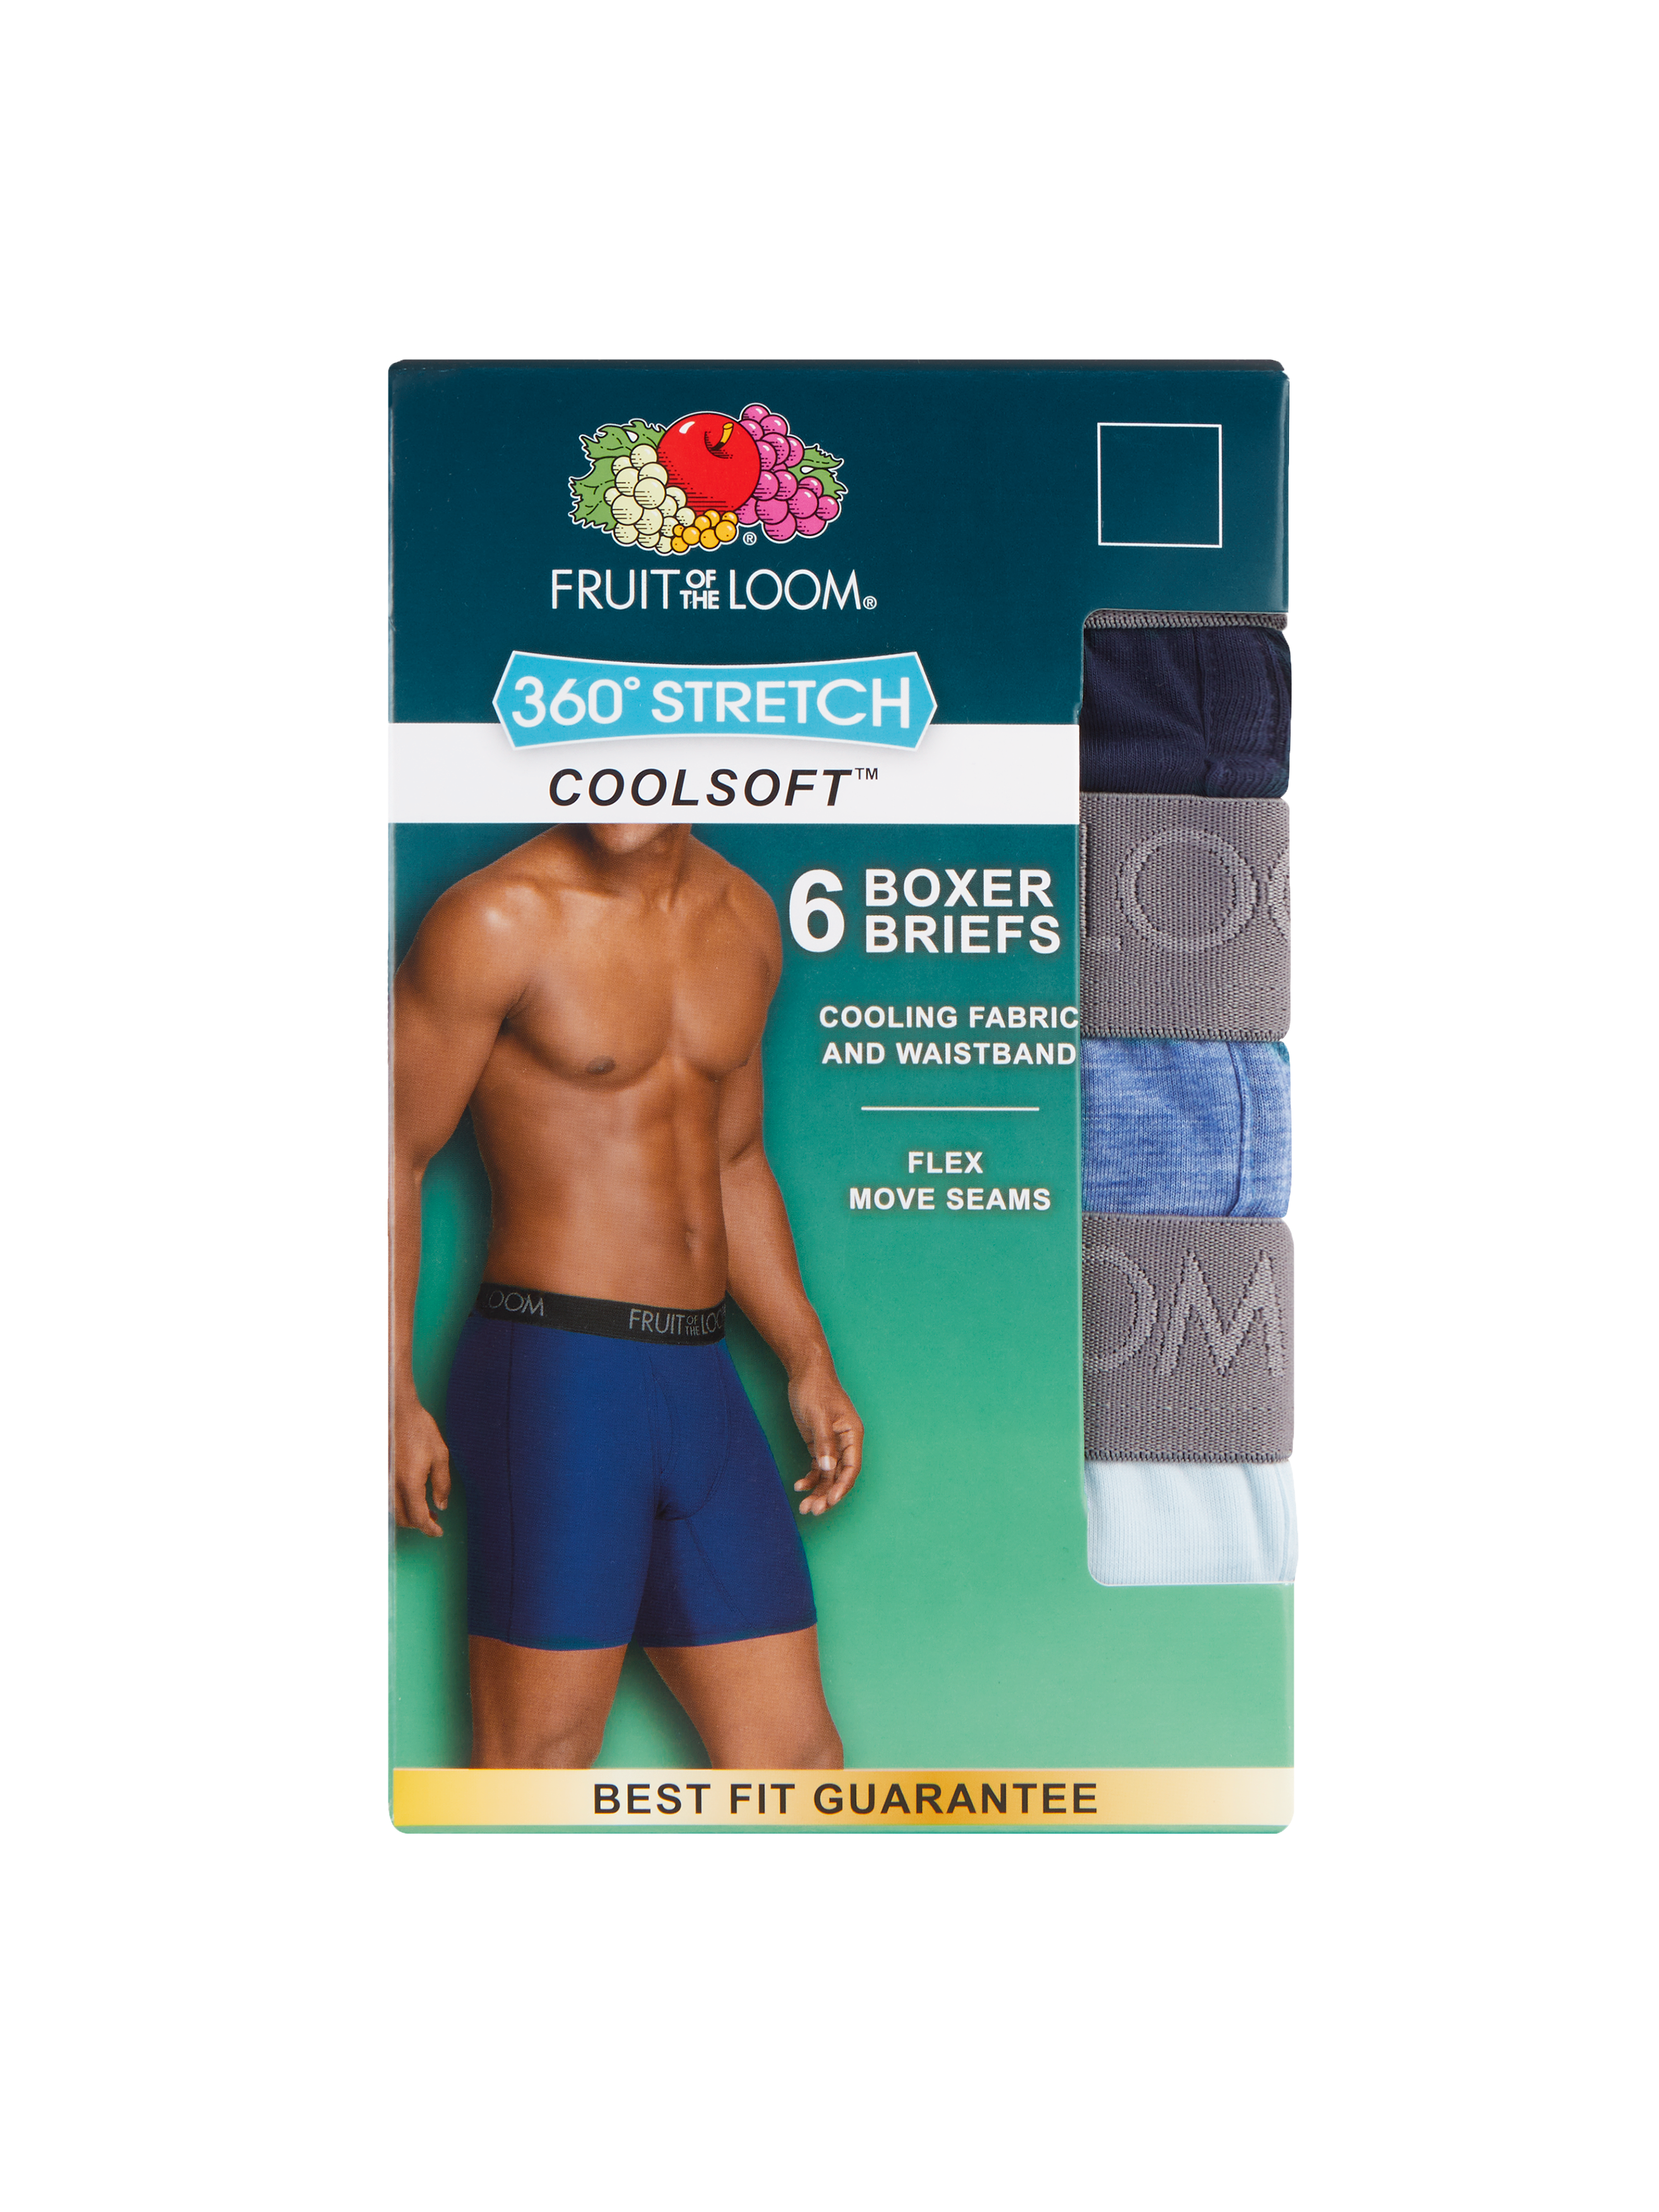 FRUIT OF THE LOOM MEN'S 360 STRETCH COOLSOFT BOXER BRIEF, ASSORTED 6 PACK